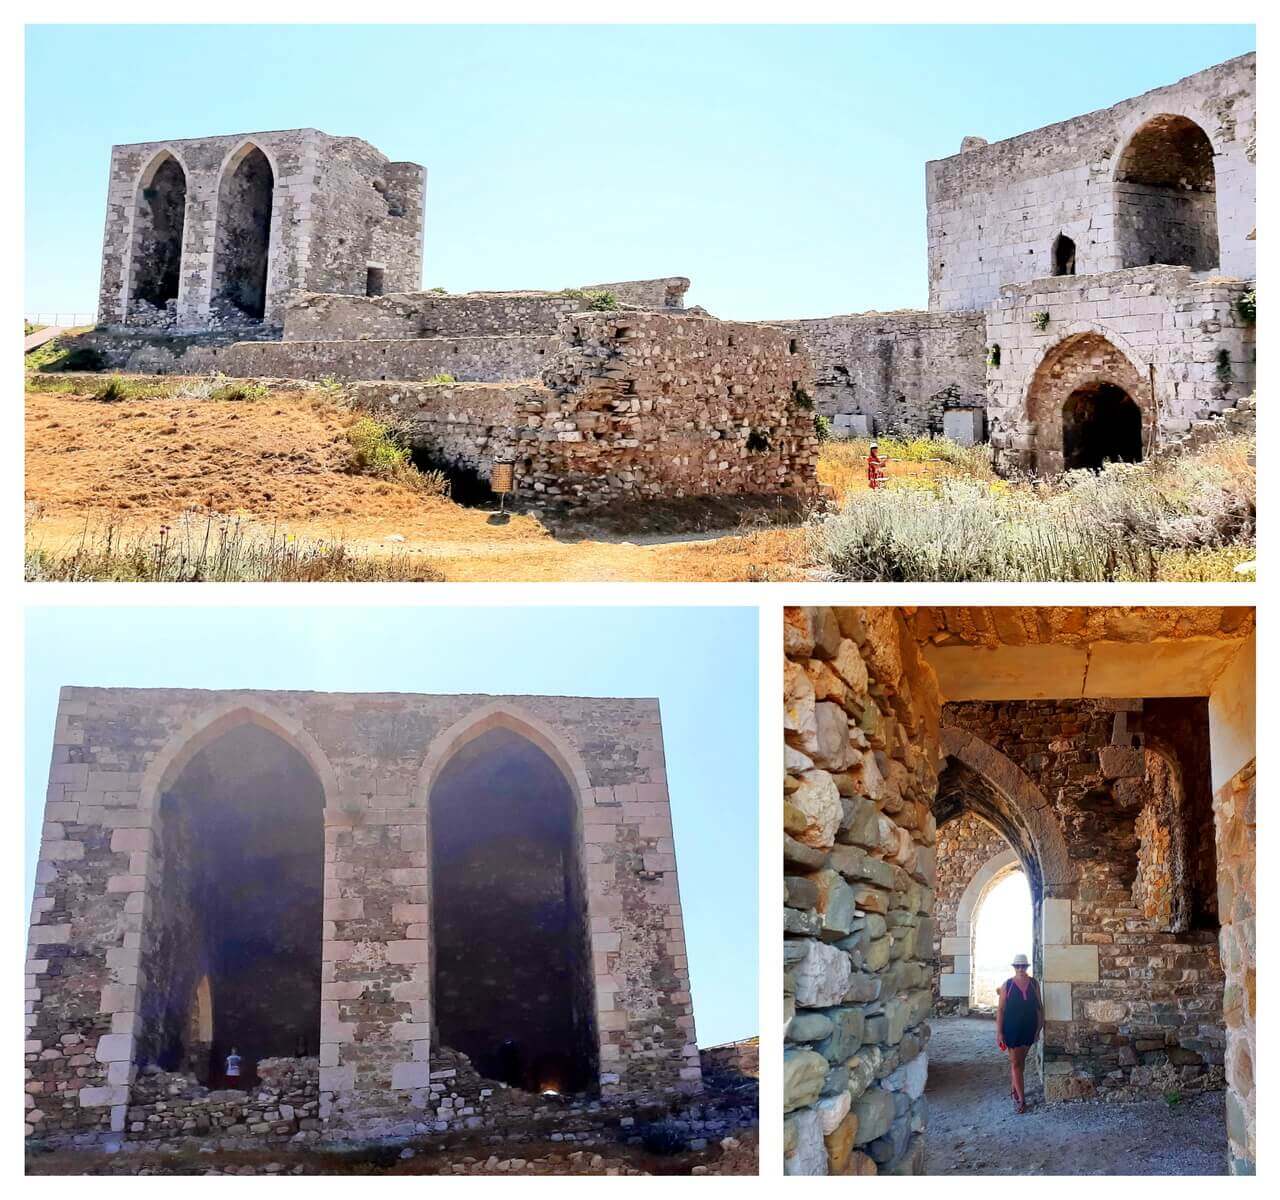 Building with arched windows.. Methoni castle